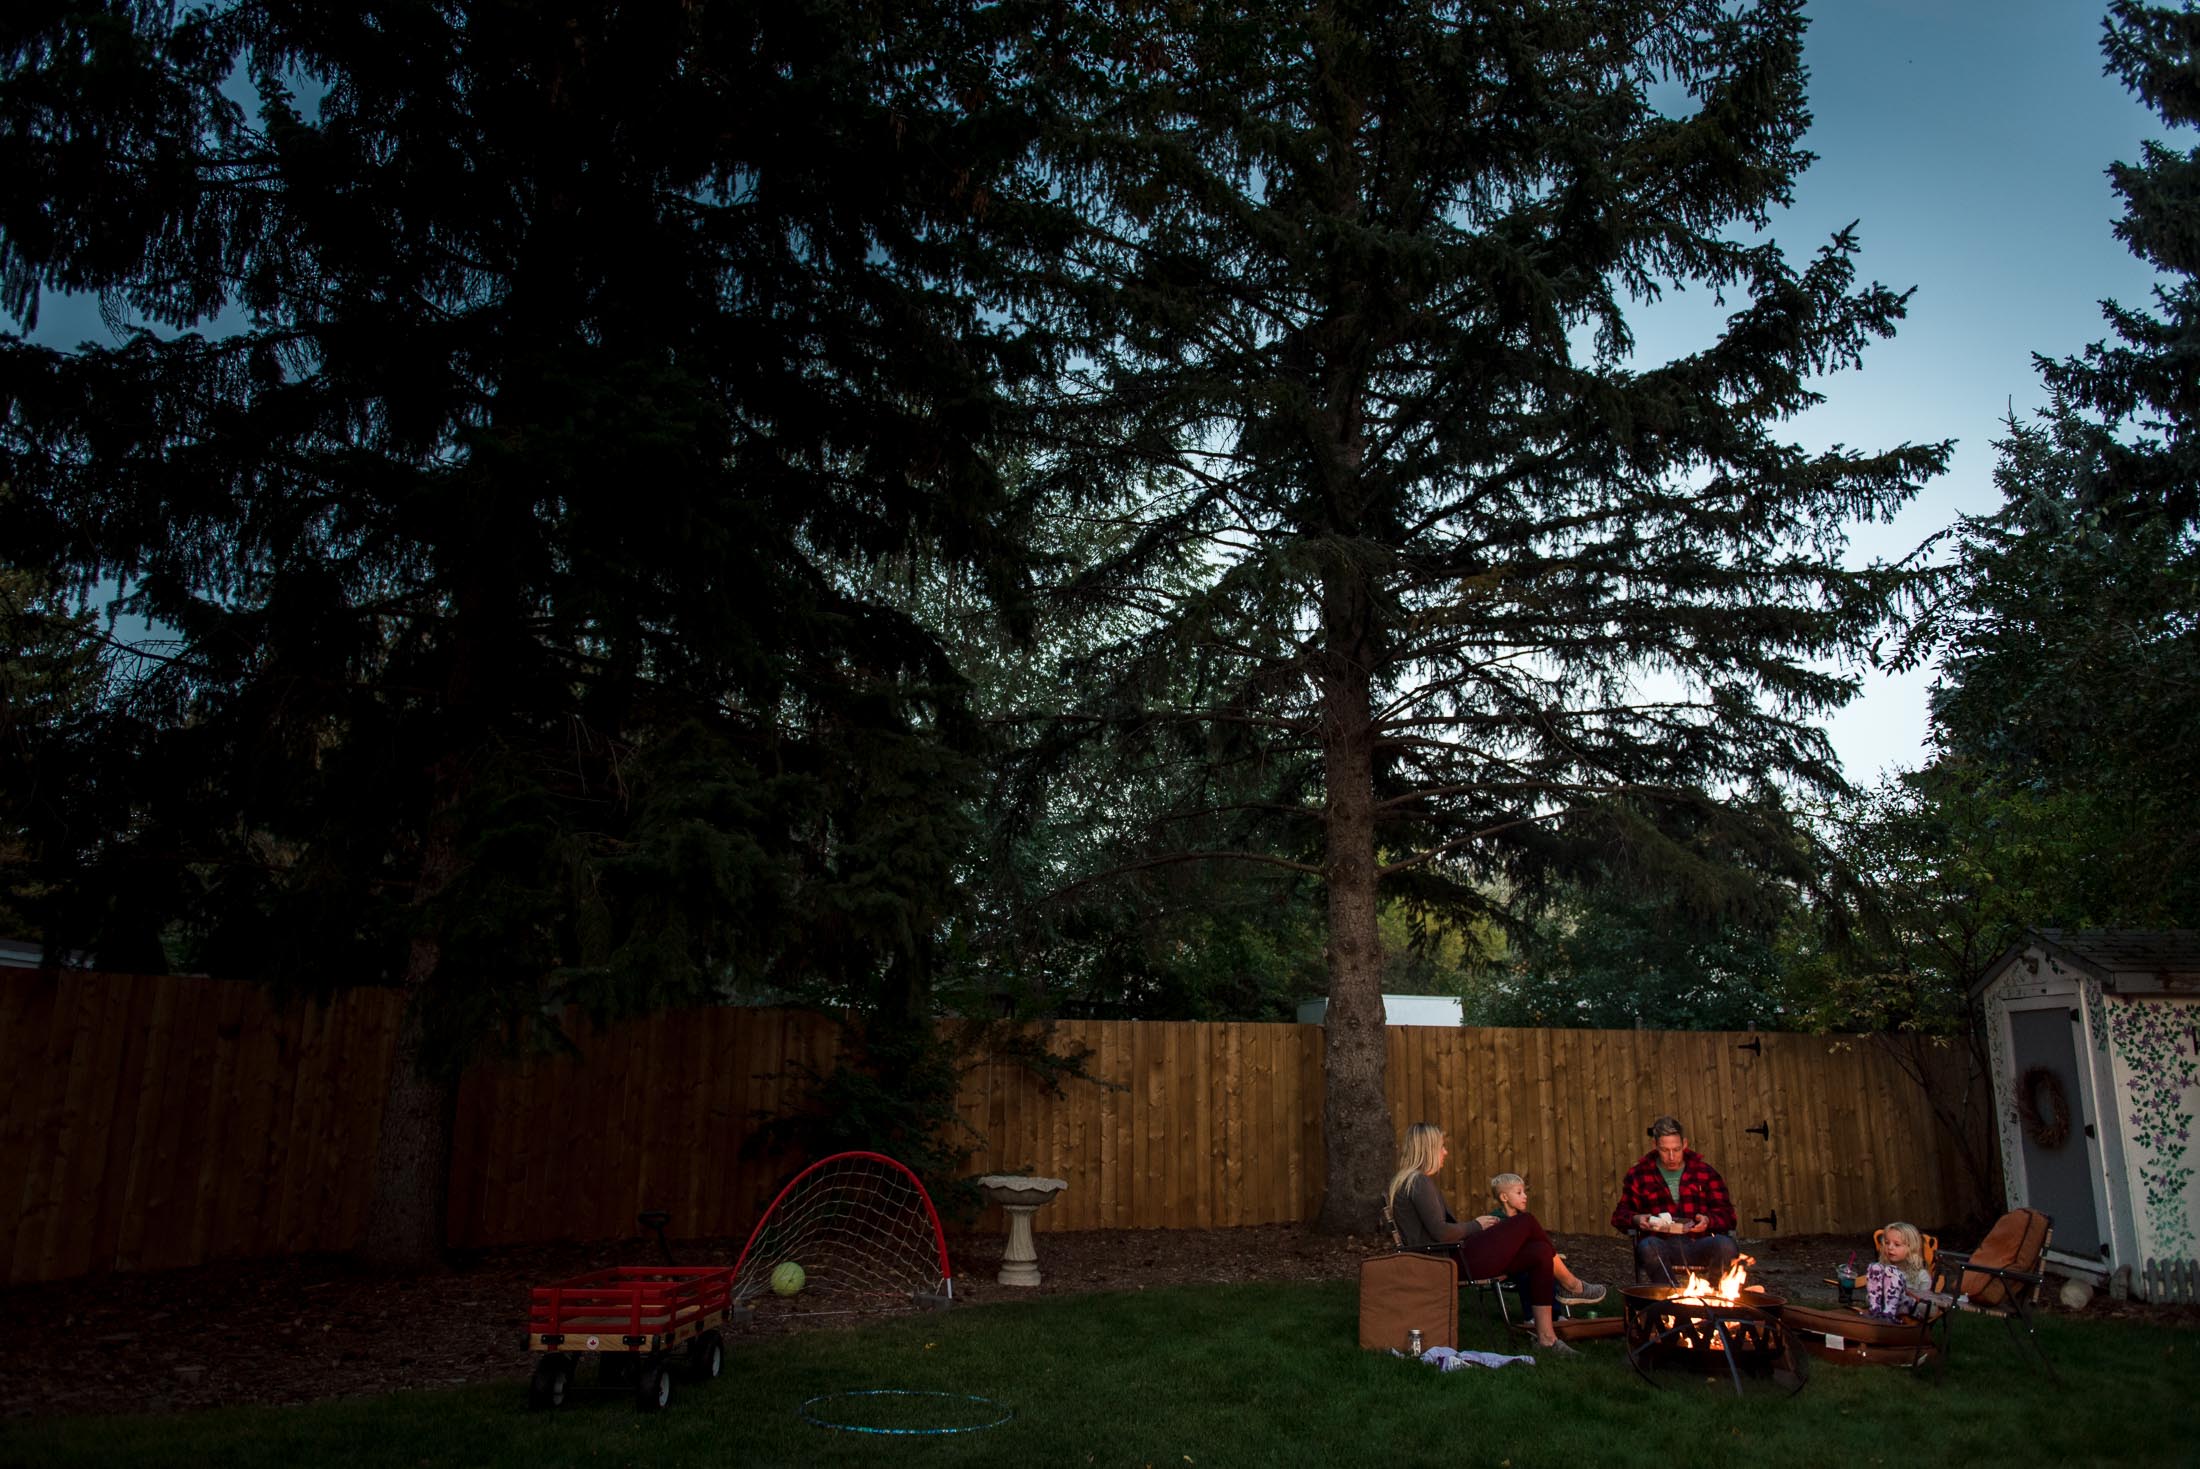 A family has a fire in their edmonton backyard in the summer